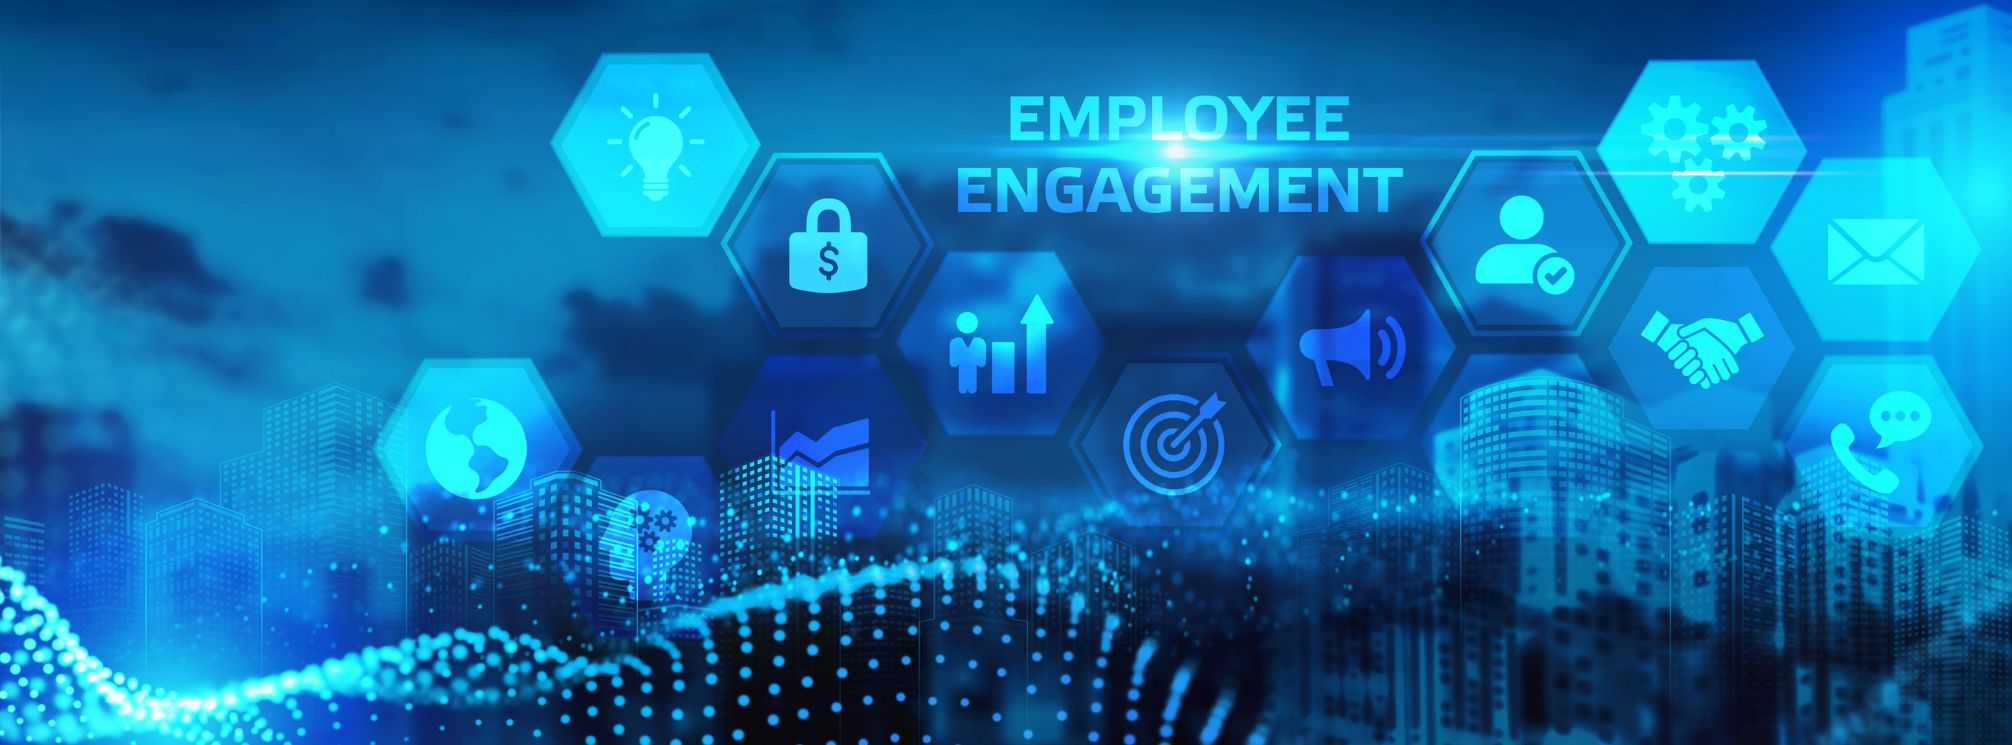 blue graphic with icons representing elements of the employee experience and the words employee engagement